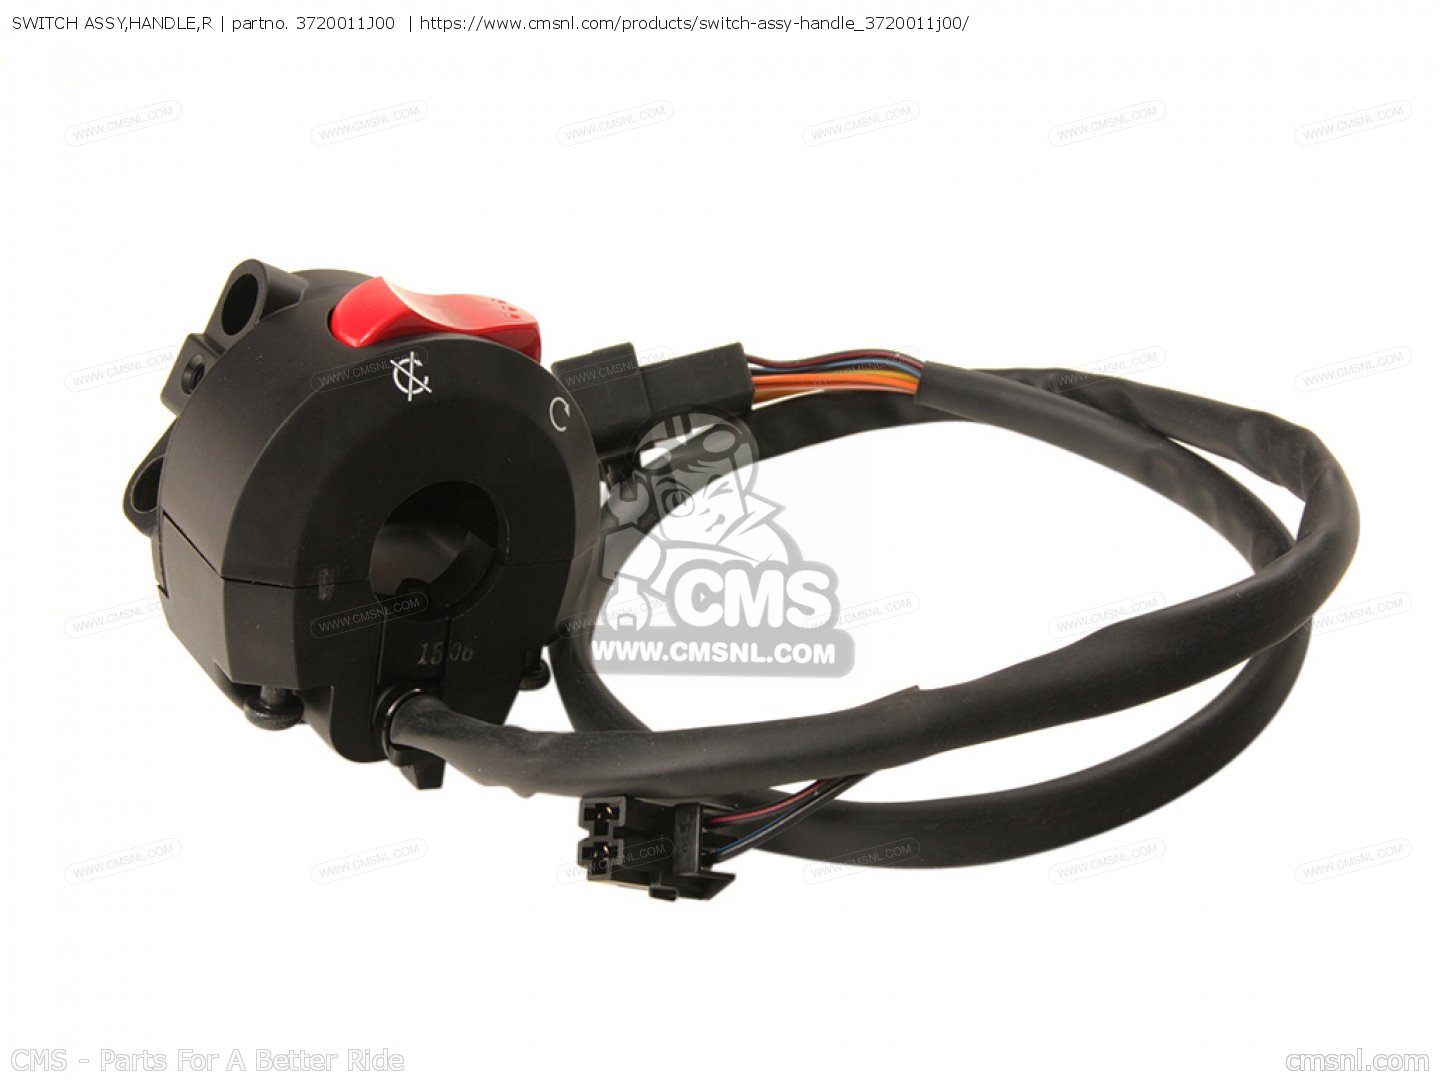 SWITCH ASSY,HANDLE,R for DL650A VSTROM 2014 (L4) USA (E03) - order